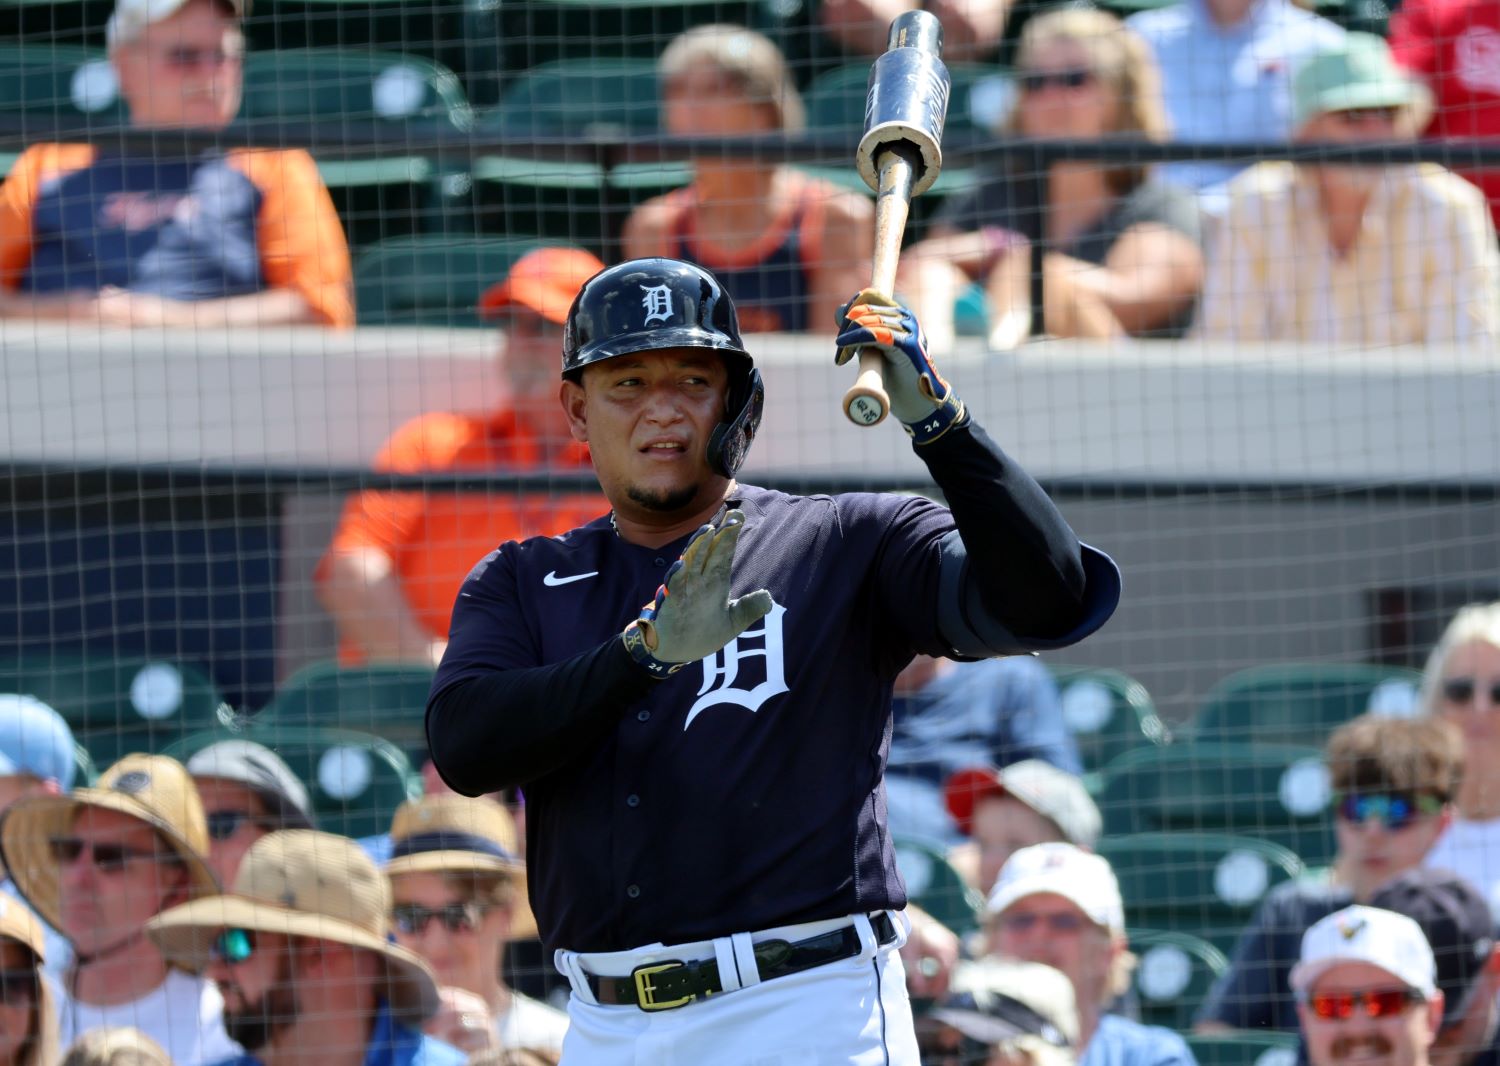 Miguel Cabrera expects no tears as farewell season begins: 'I'm